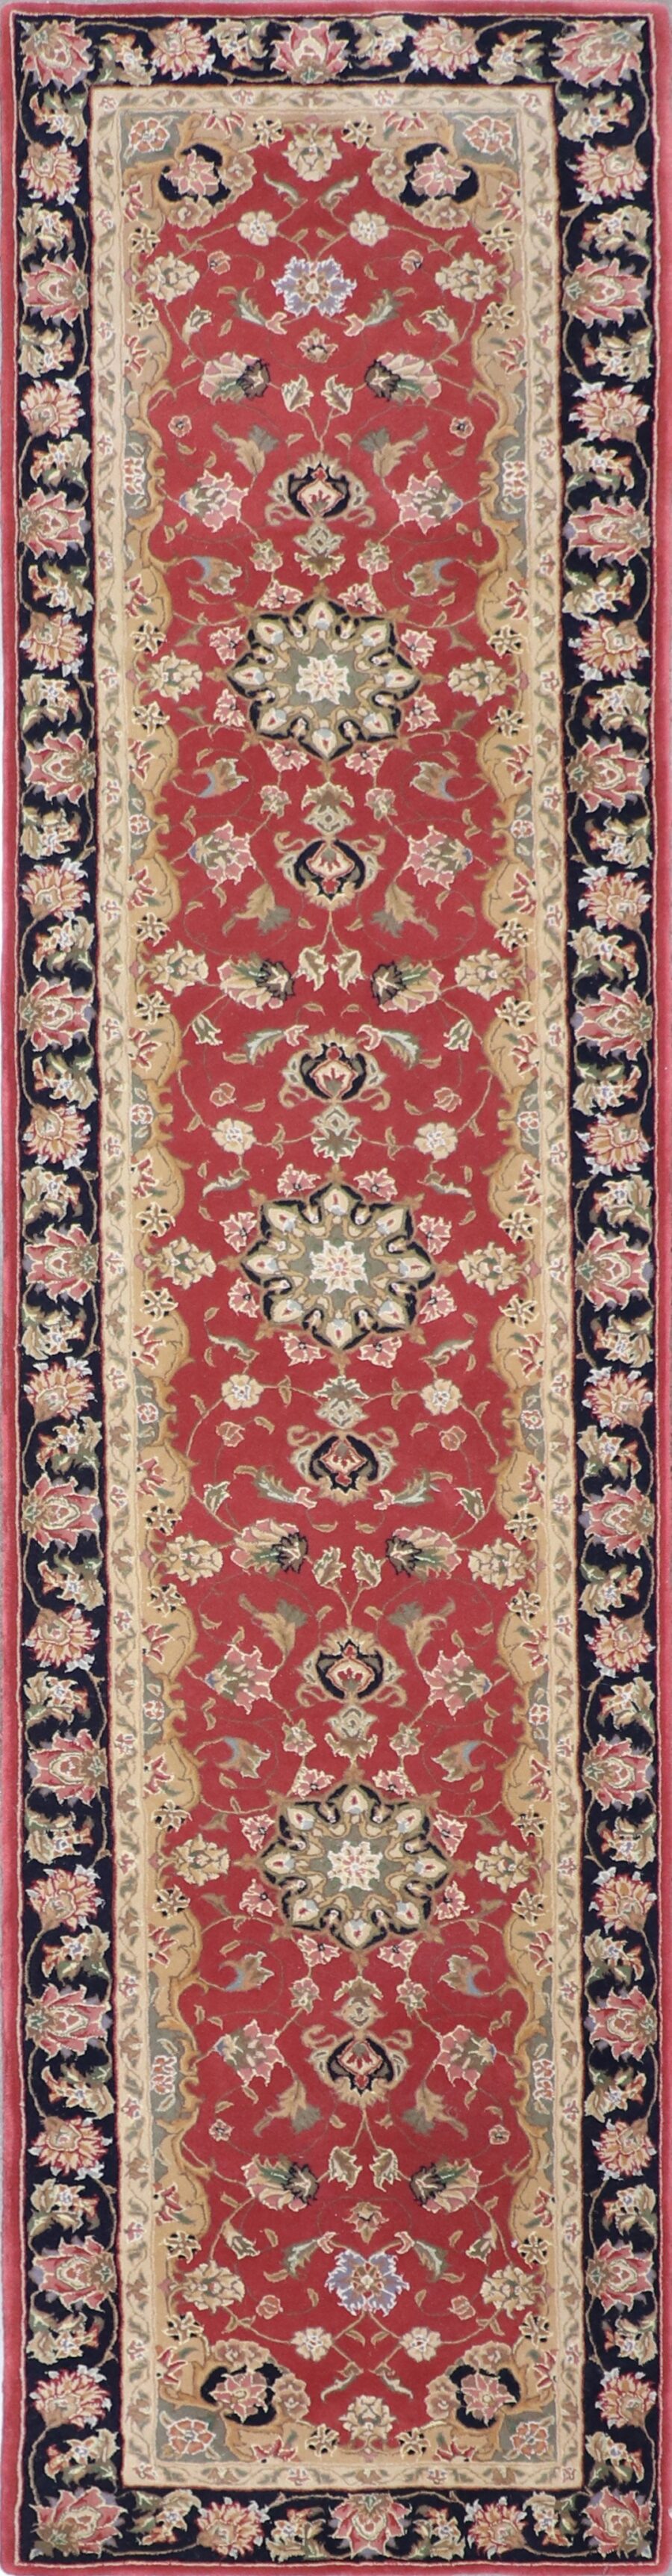 2'6"x12' Traditional Wool Hand-Tufted Rug - Direct Rug Import | Rugs in Chicago, Indiana,South Bend,Granger